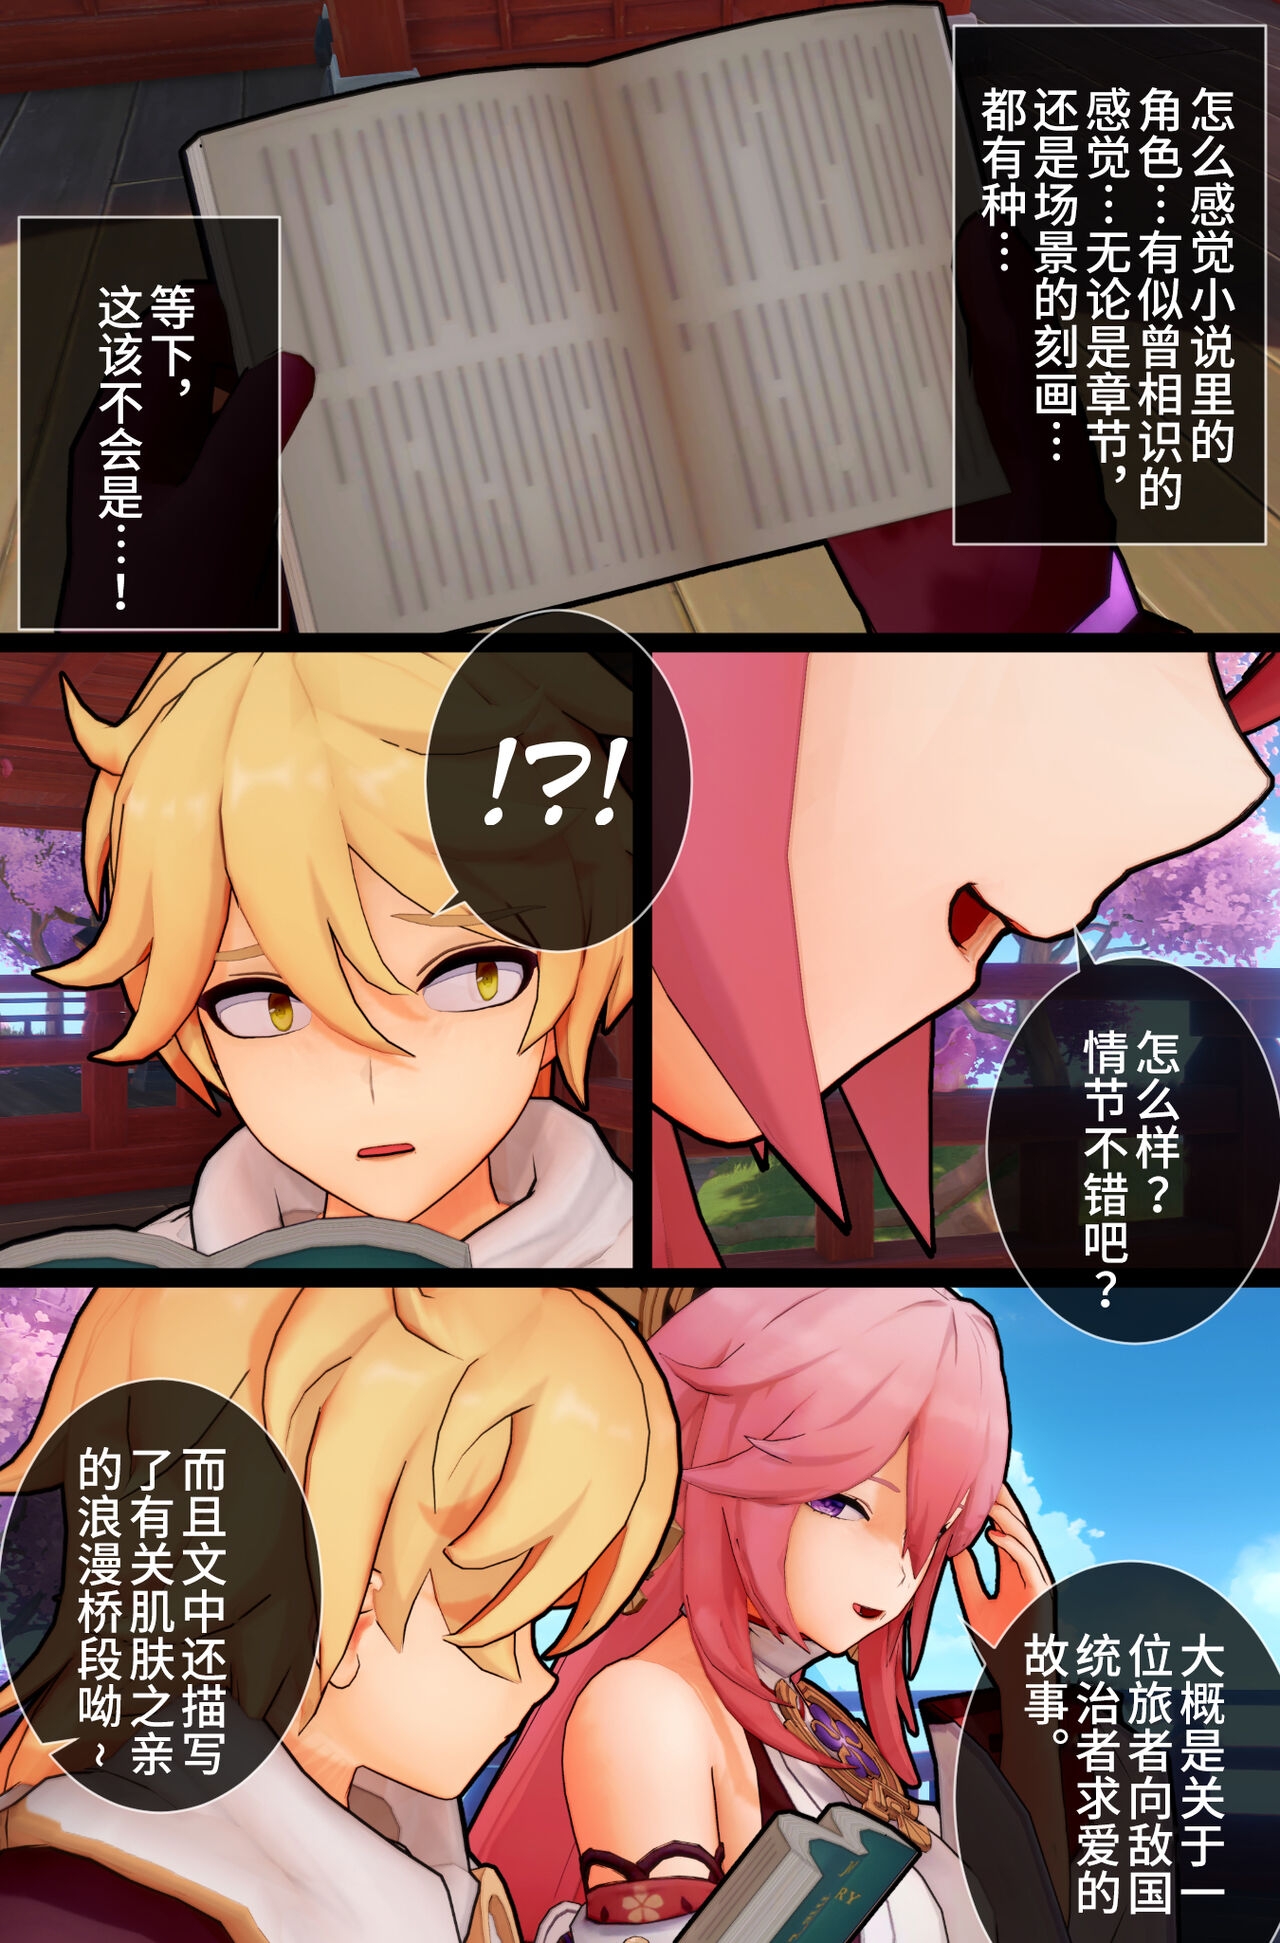 [ActualE] The Vixen And Its Pup (Genshin Impact) [Chinese] [黎欧出资汉化] [Decensored] 6